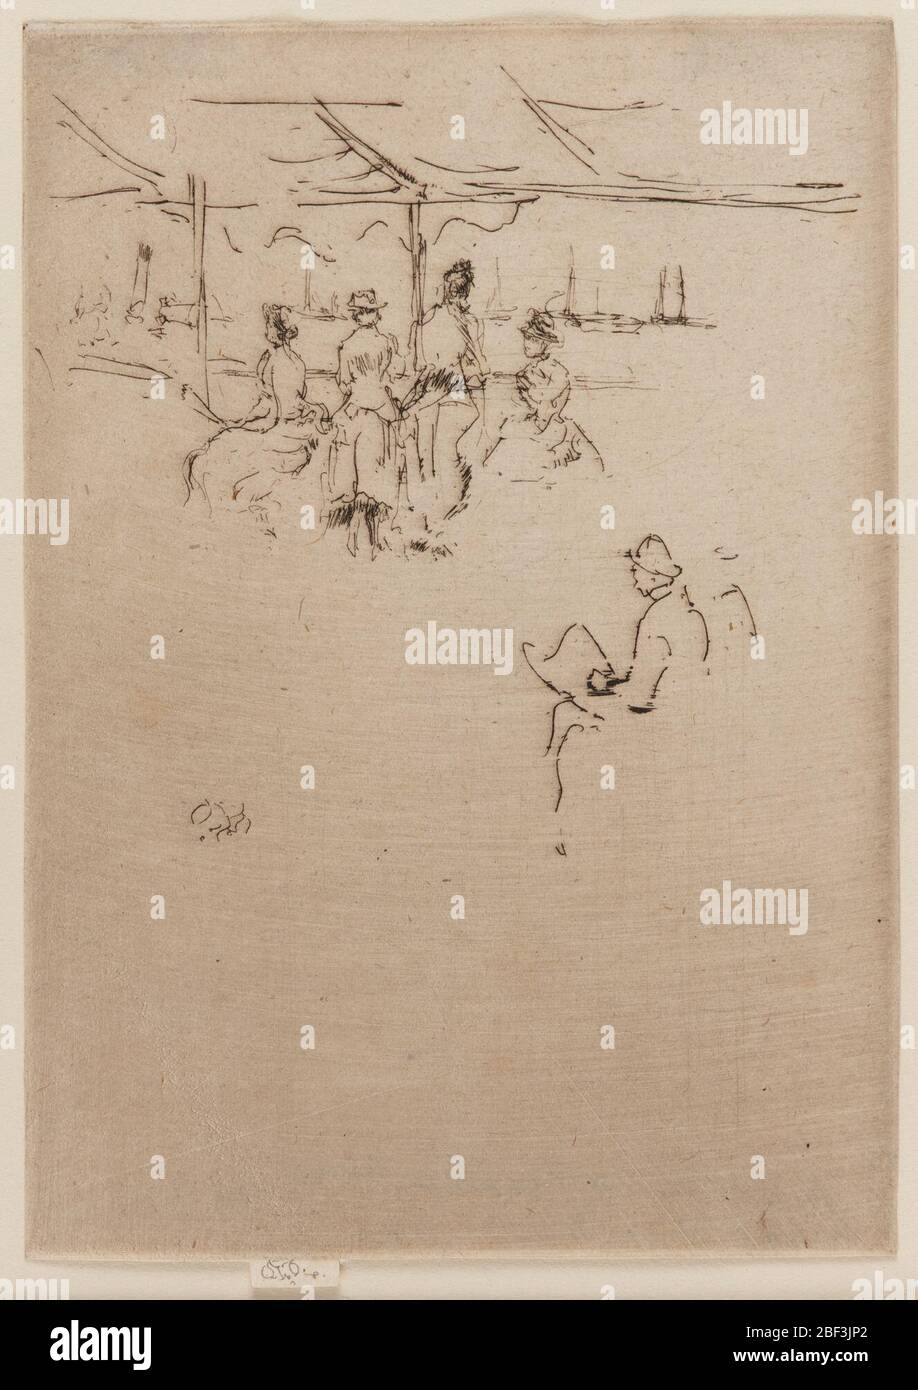 (Artist) James McNeill Whistler; United States; 1887; Etching on paper; H x W: 13.2 x 9.4 cm (5 3/16 x 3 11/16 in); Gift of Charles Lang Freer Stock Photo